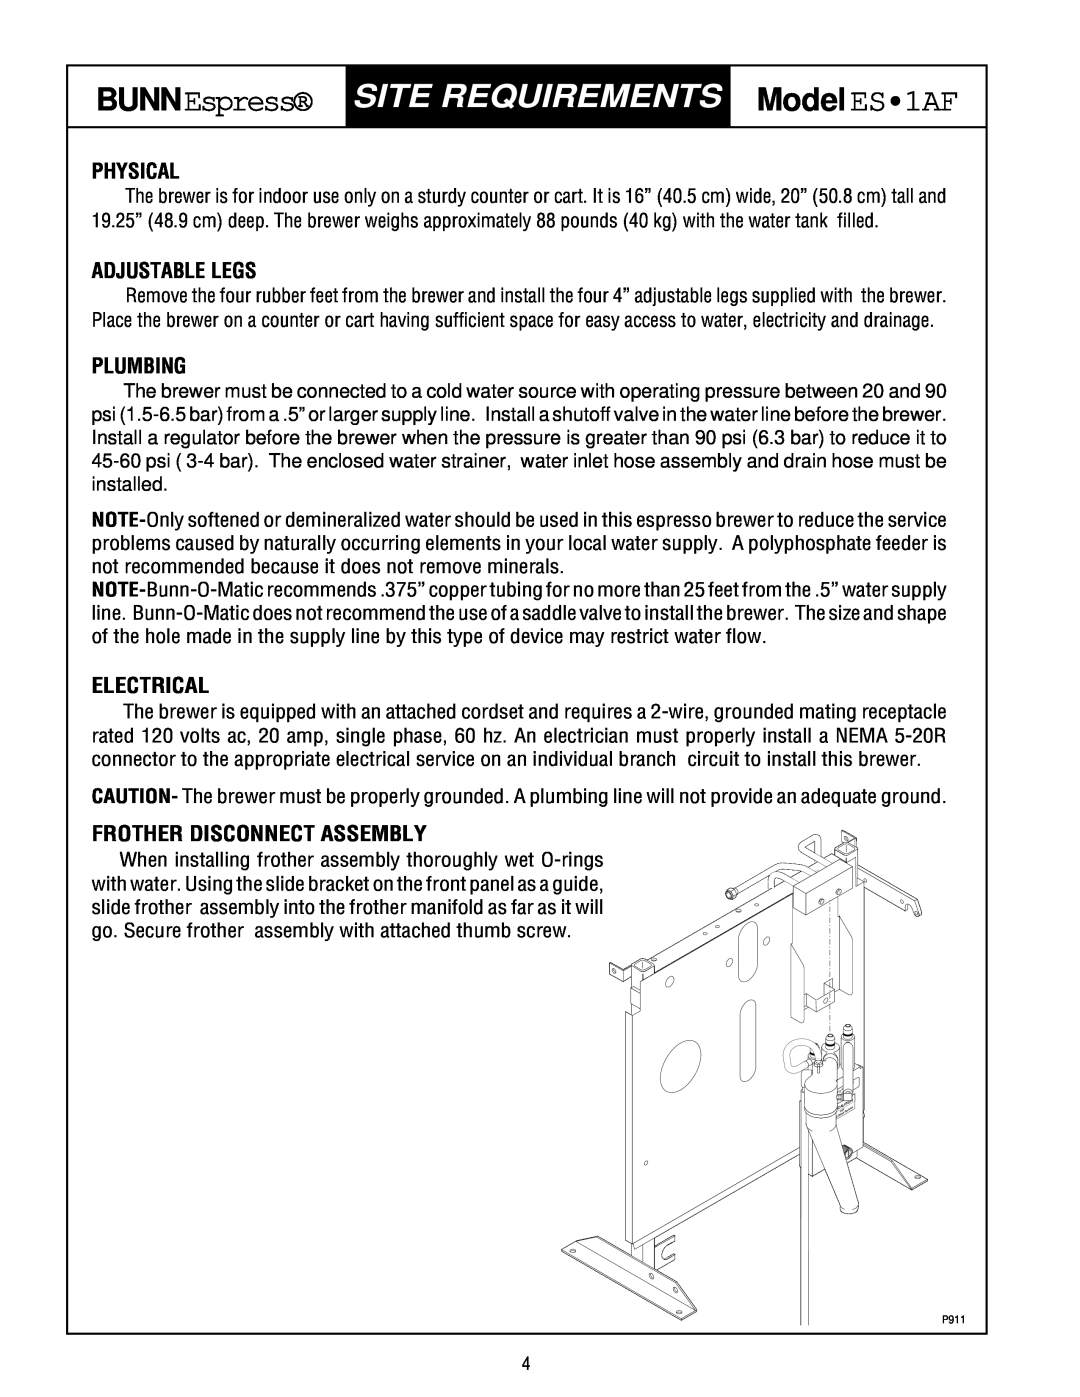 Bunn ES1AF Site Requirements, Physical, Adjustable Legs, Plumbing, Electrical, Frother Disconnect Assembly, BUNNEspress 